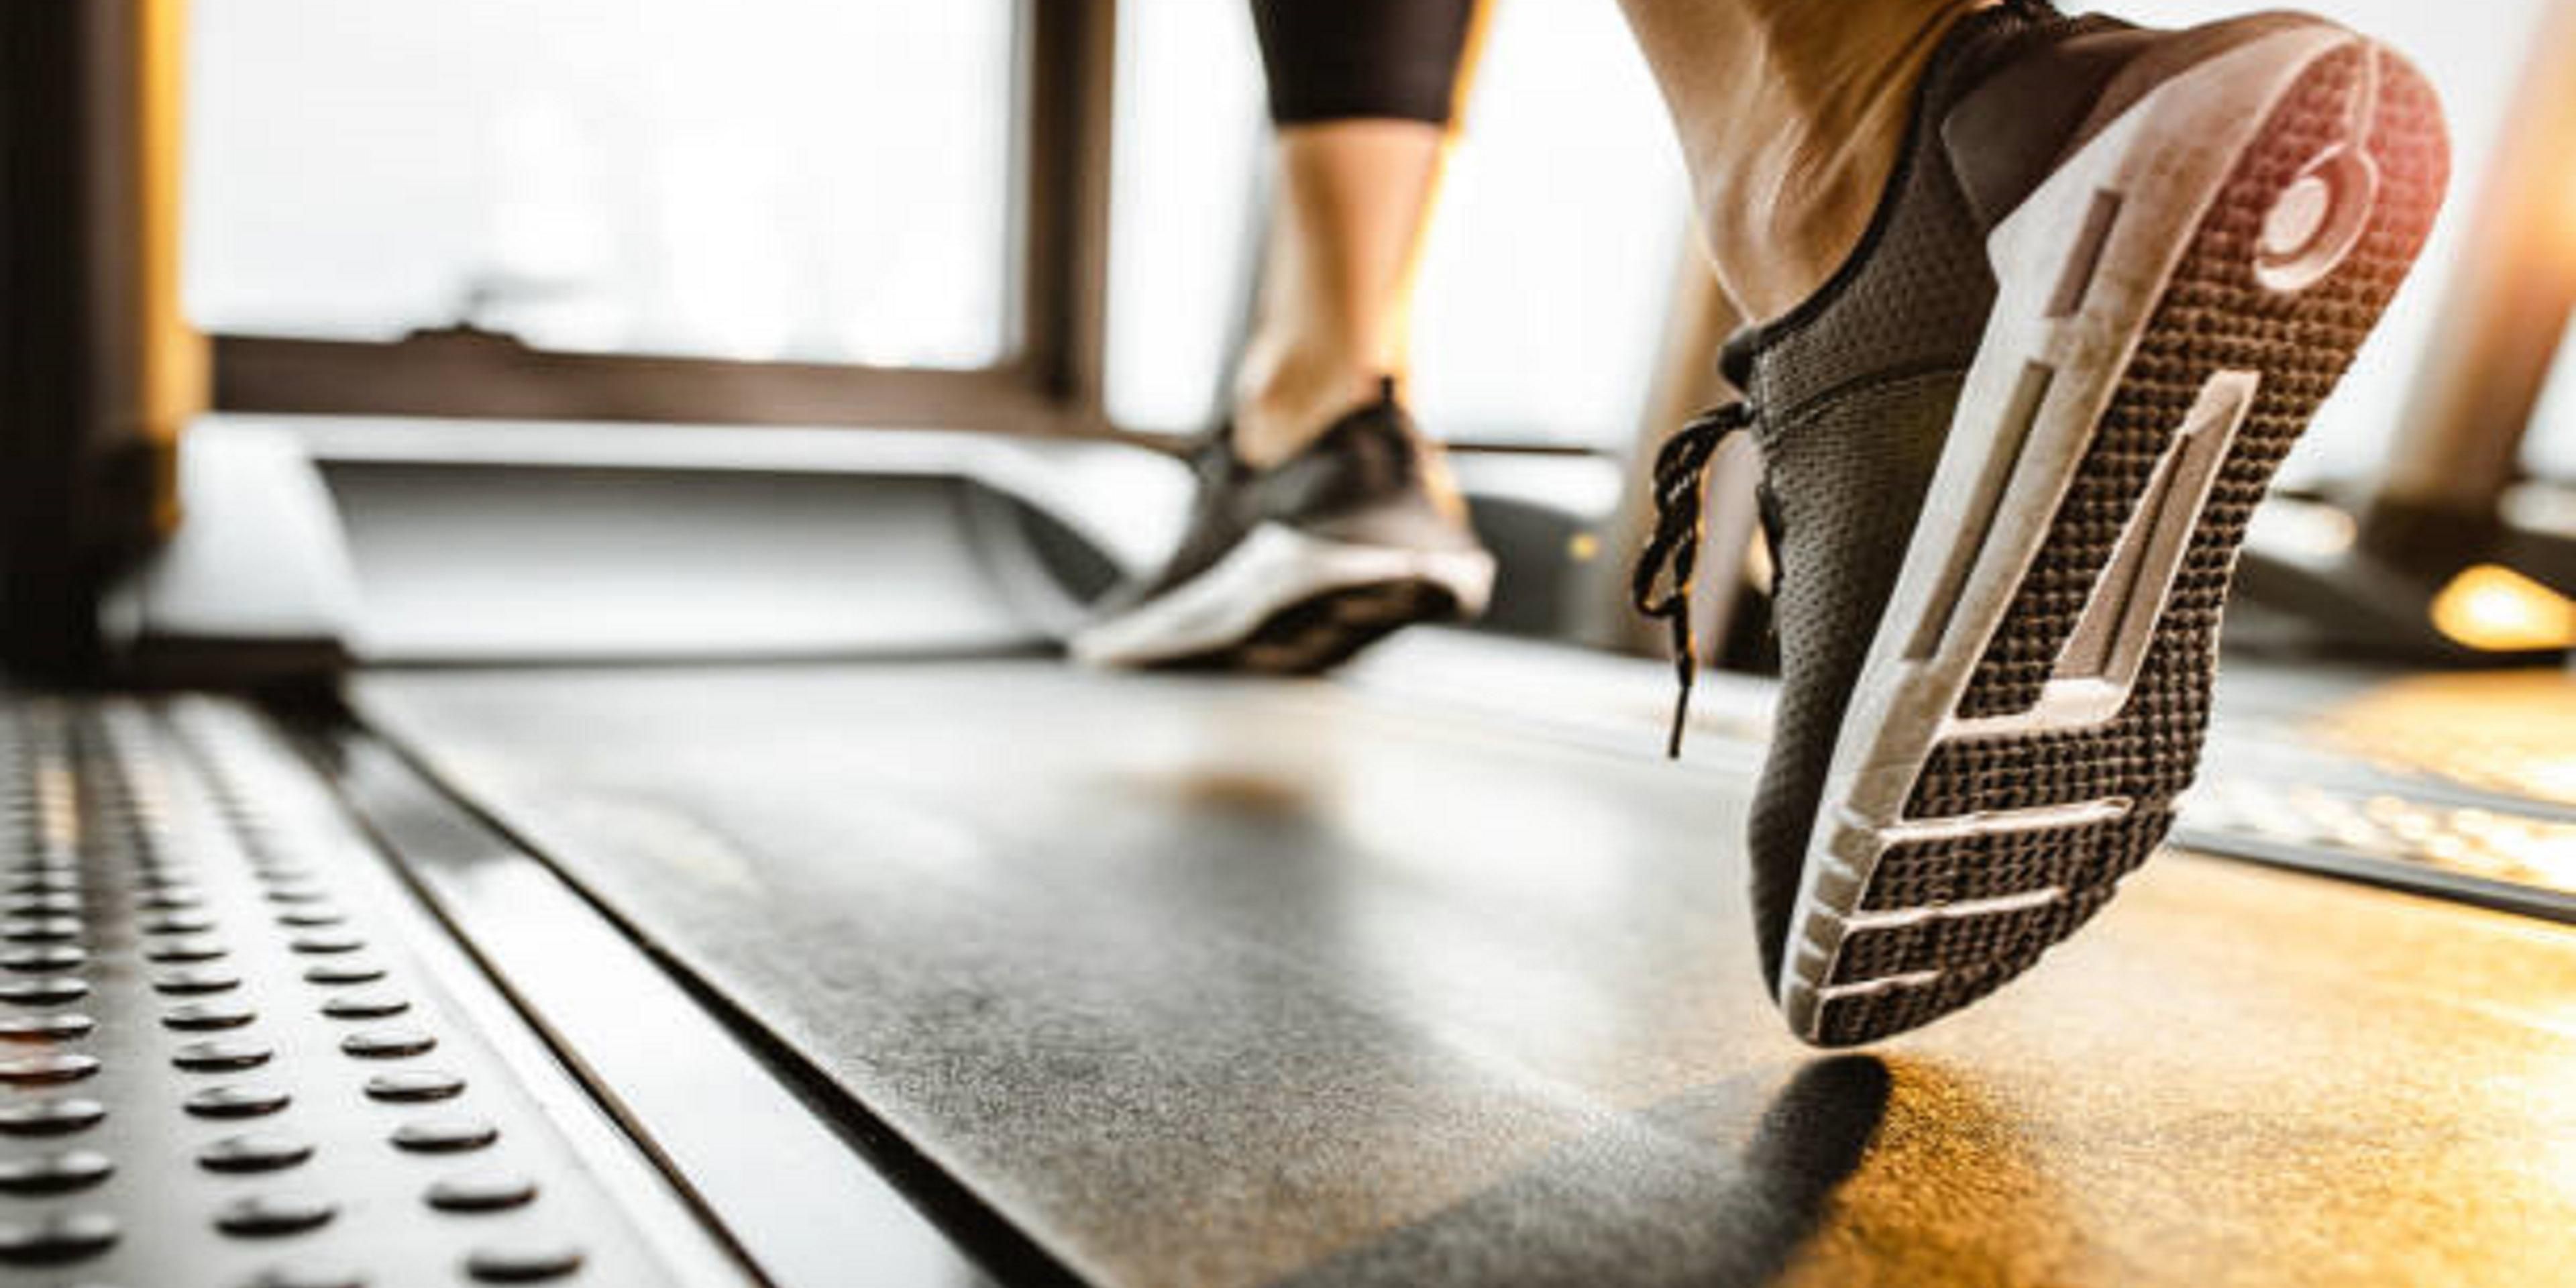 Get your sweat on in our complimentary, fully equipped fitness center open 24/7.